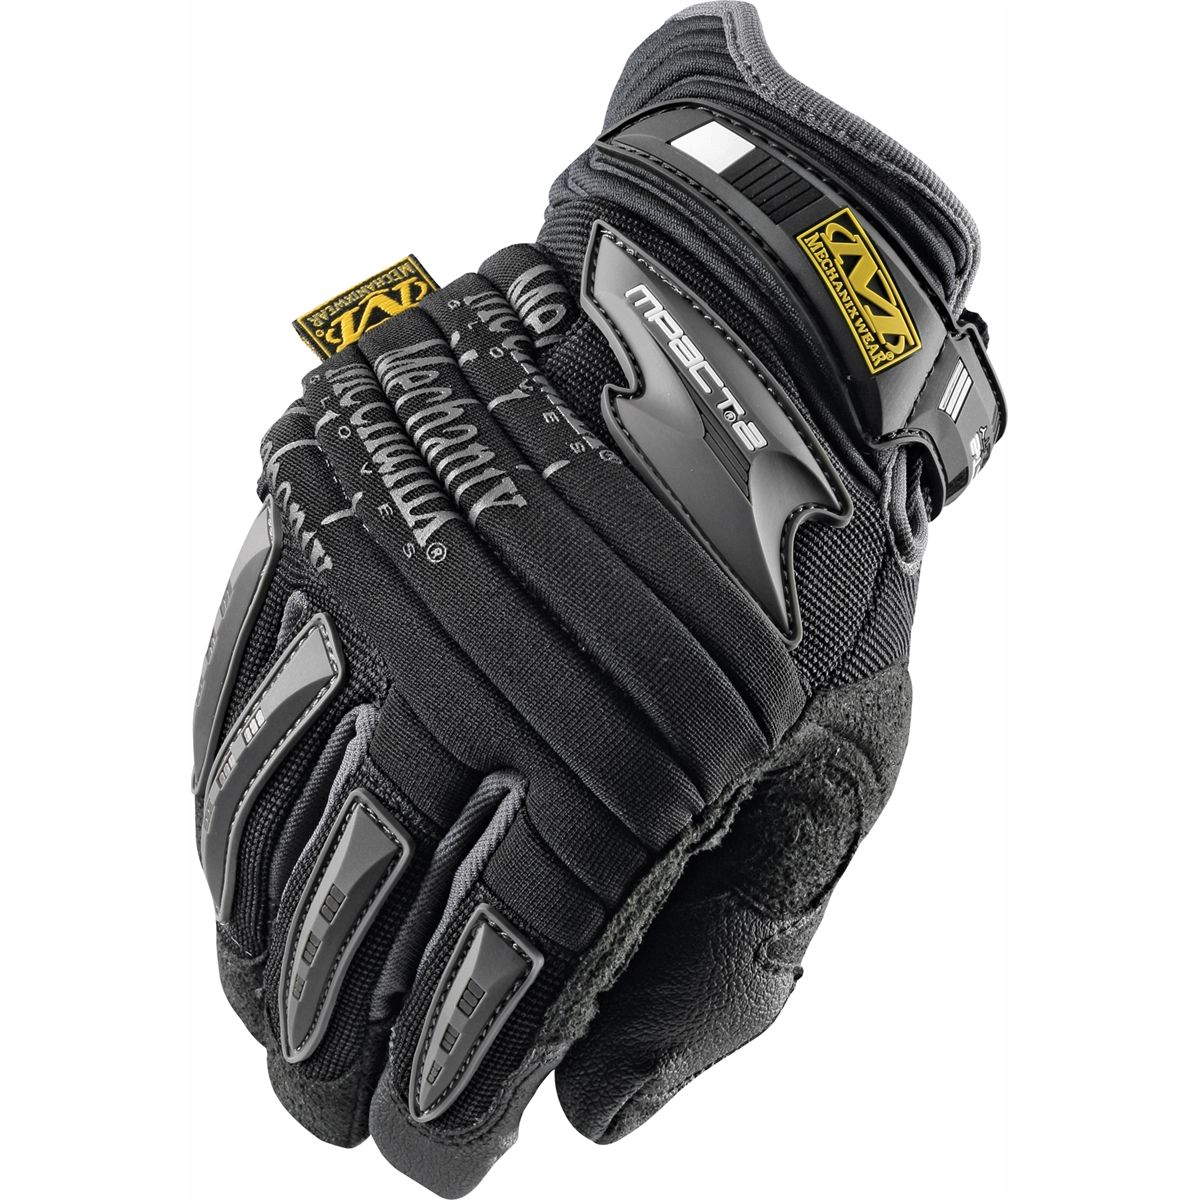 M-Pact II Gloves - Black - Small